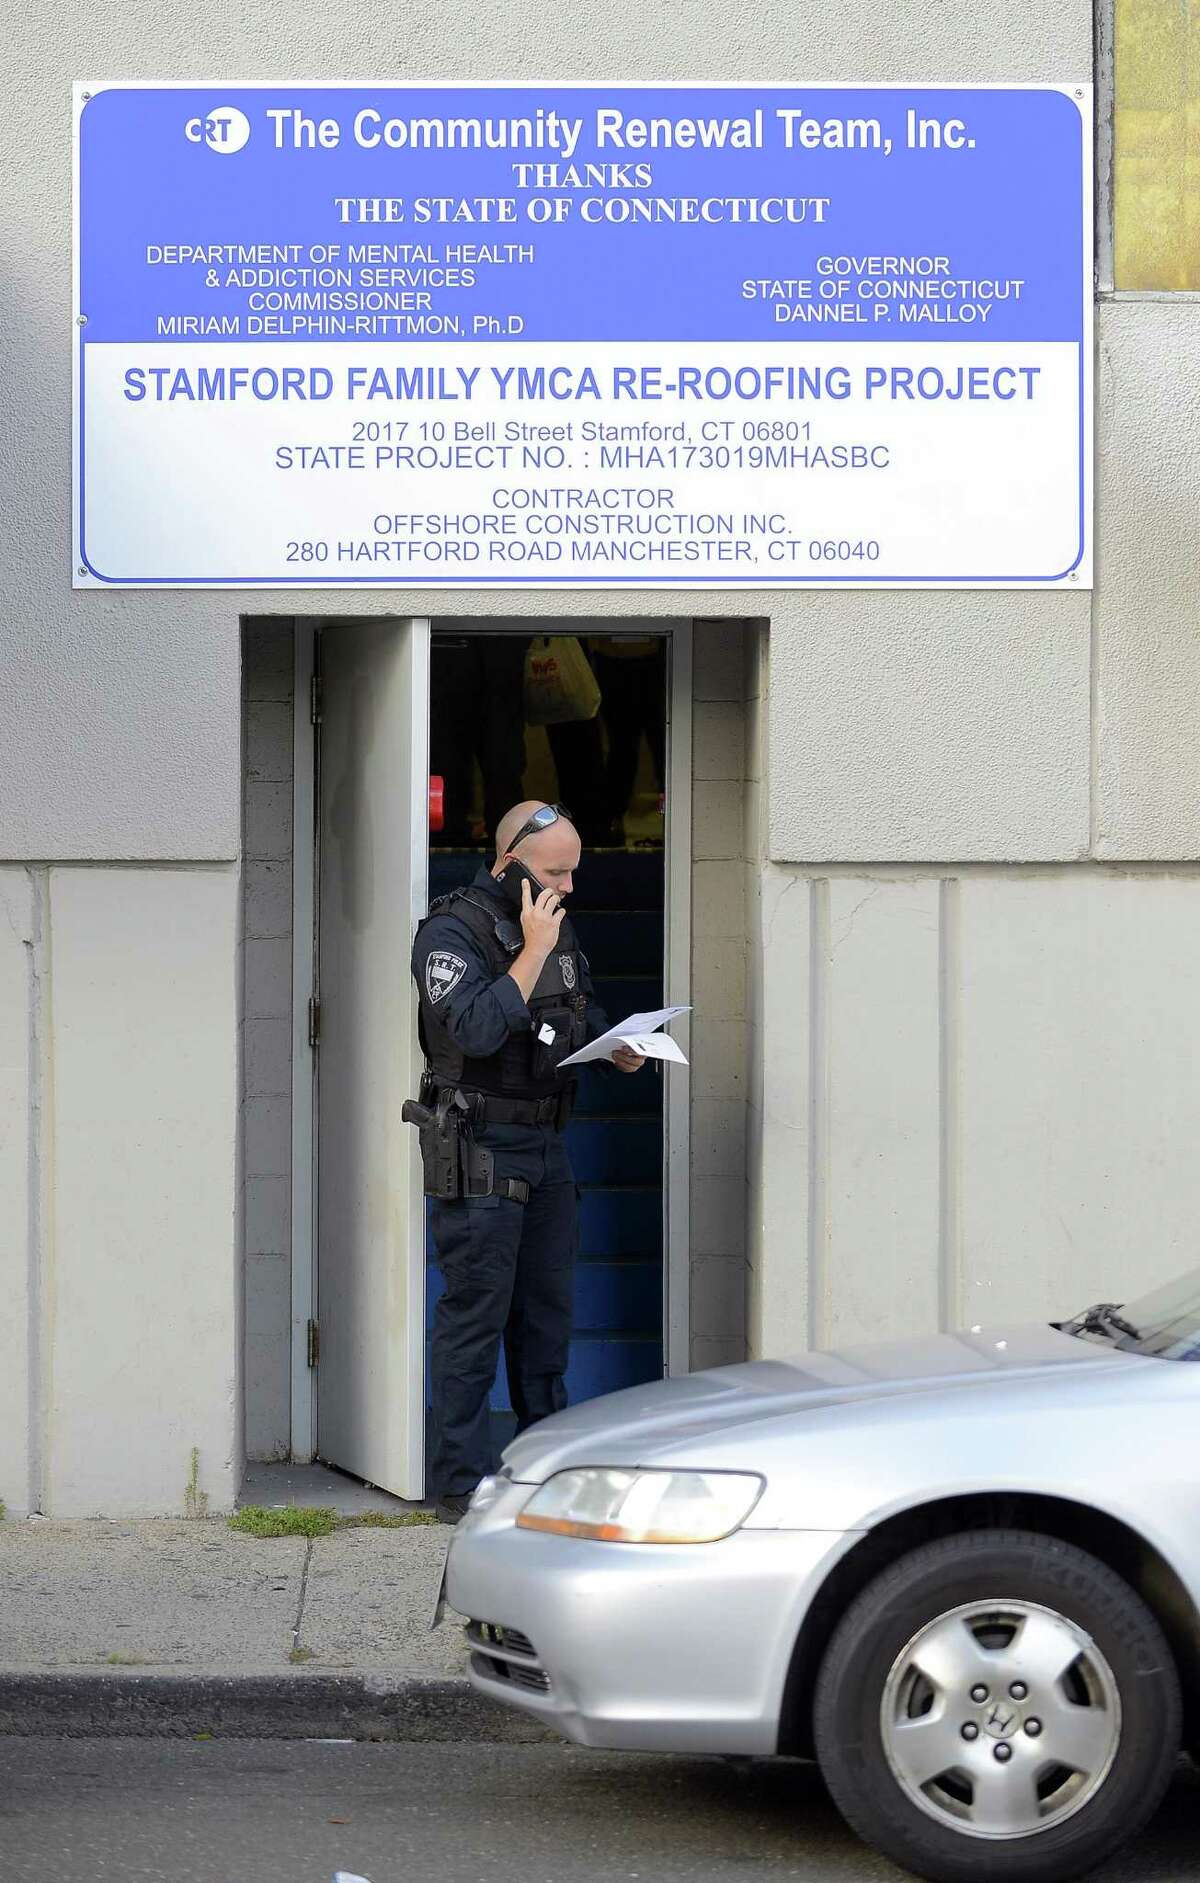 Stamford police investigate a near drowning of an adult male in the pool at the Stamford Family YWCA on Friday, Oct. 13, 2017 in Stamford, Connecticut. The victim was rush to Stamford Hospital, according to police on scene.